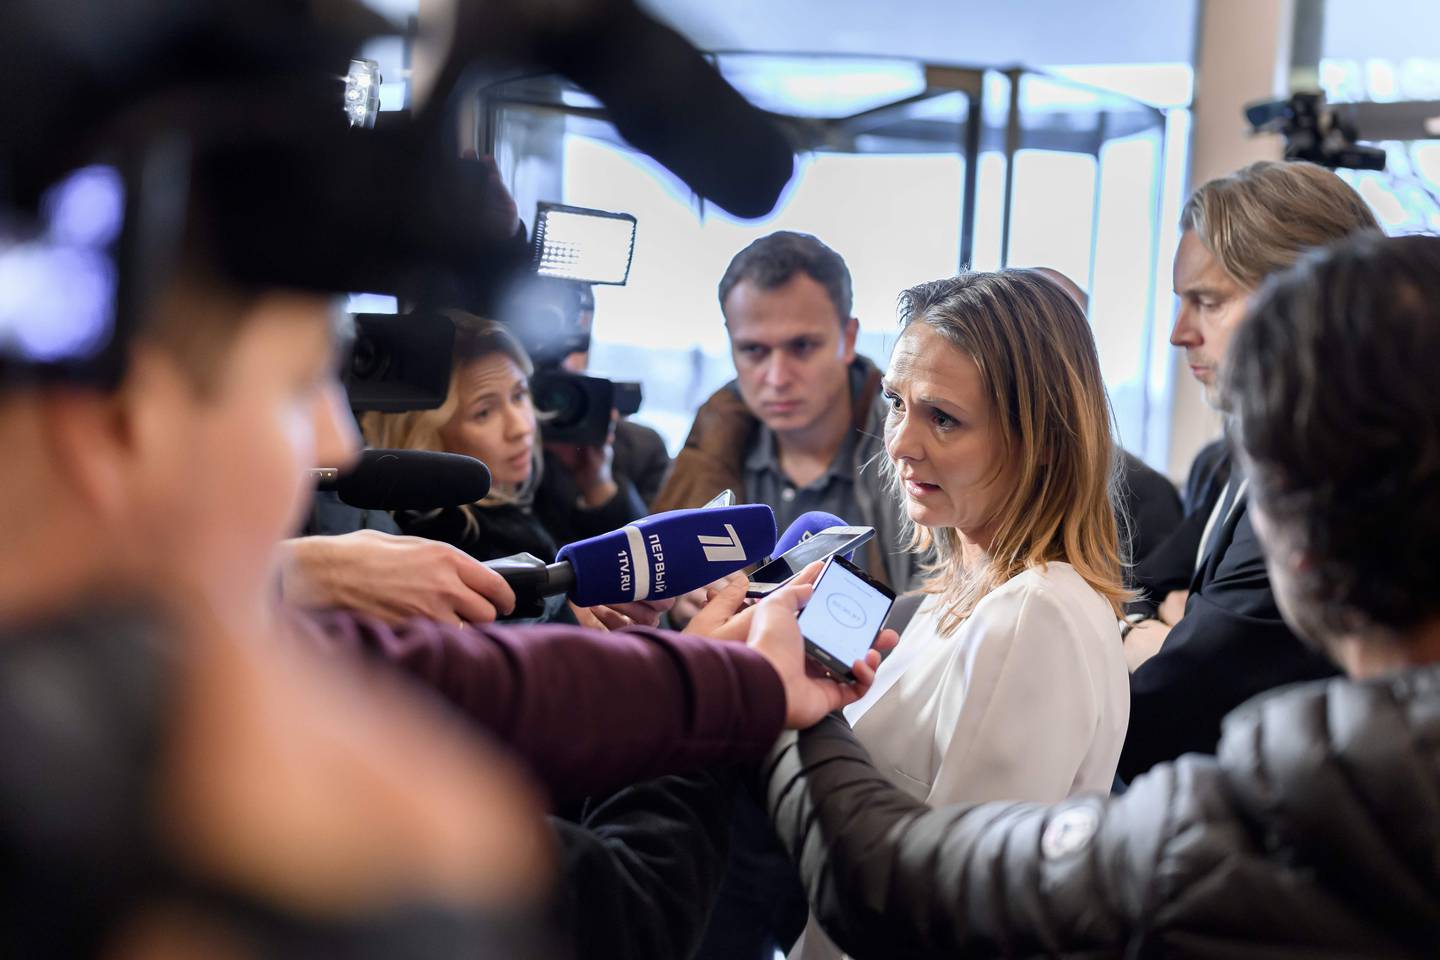 Norway's Linda Hofstad Helleland, a member of the World Anti-Doping Agency (WADA) foundation board, answers journalists following a meeting of WADA's executive committee on December 9, 2019 in Lausanne. - The World Anti-Doping Agency banned Russia today from global sporting events including the 2020 Tokyo Olympics and the 2022 Beijing Winter Olympics after accusing Moscow of falsifying data from an anti-doping laboratory. (Photo by FABRICE COFFRINI / AFP)